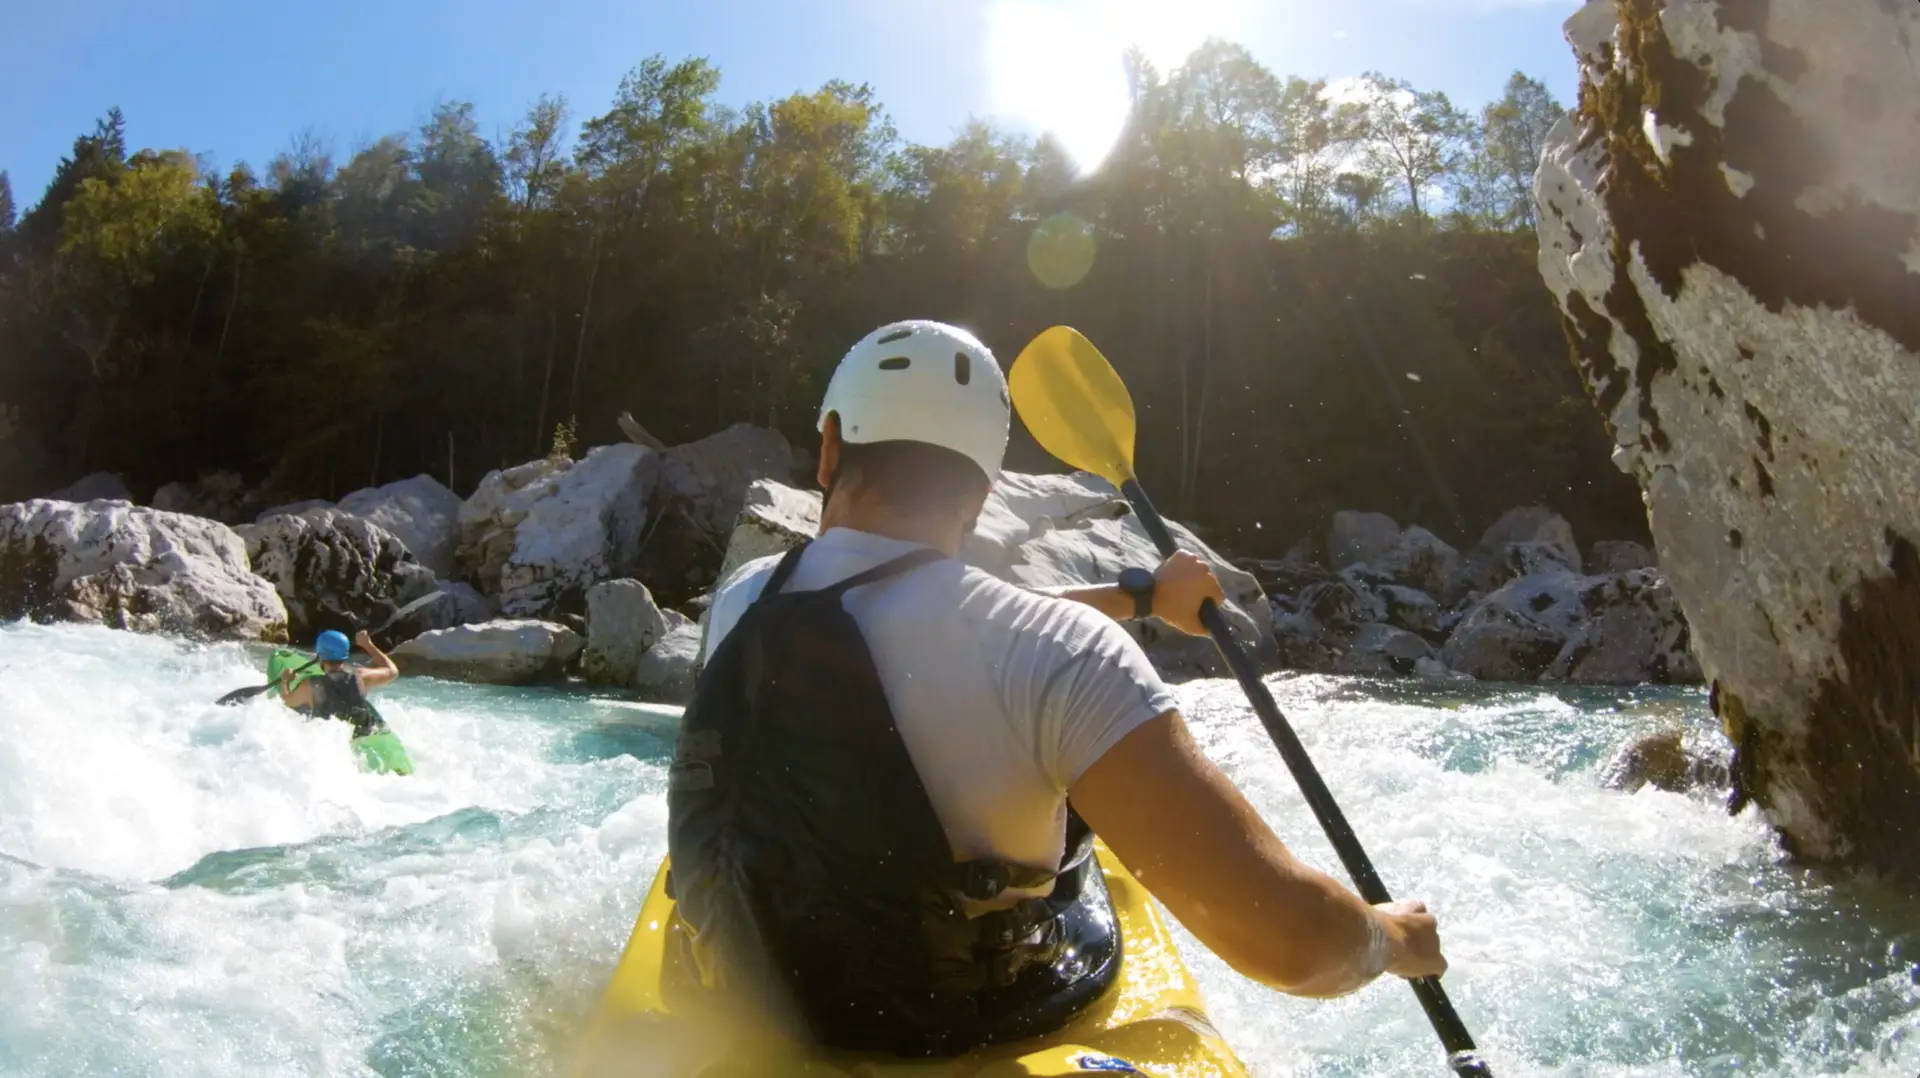 A man is kayaking down a river, turning his journey into a Trip Canvas masterpiece.